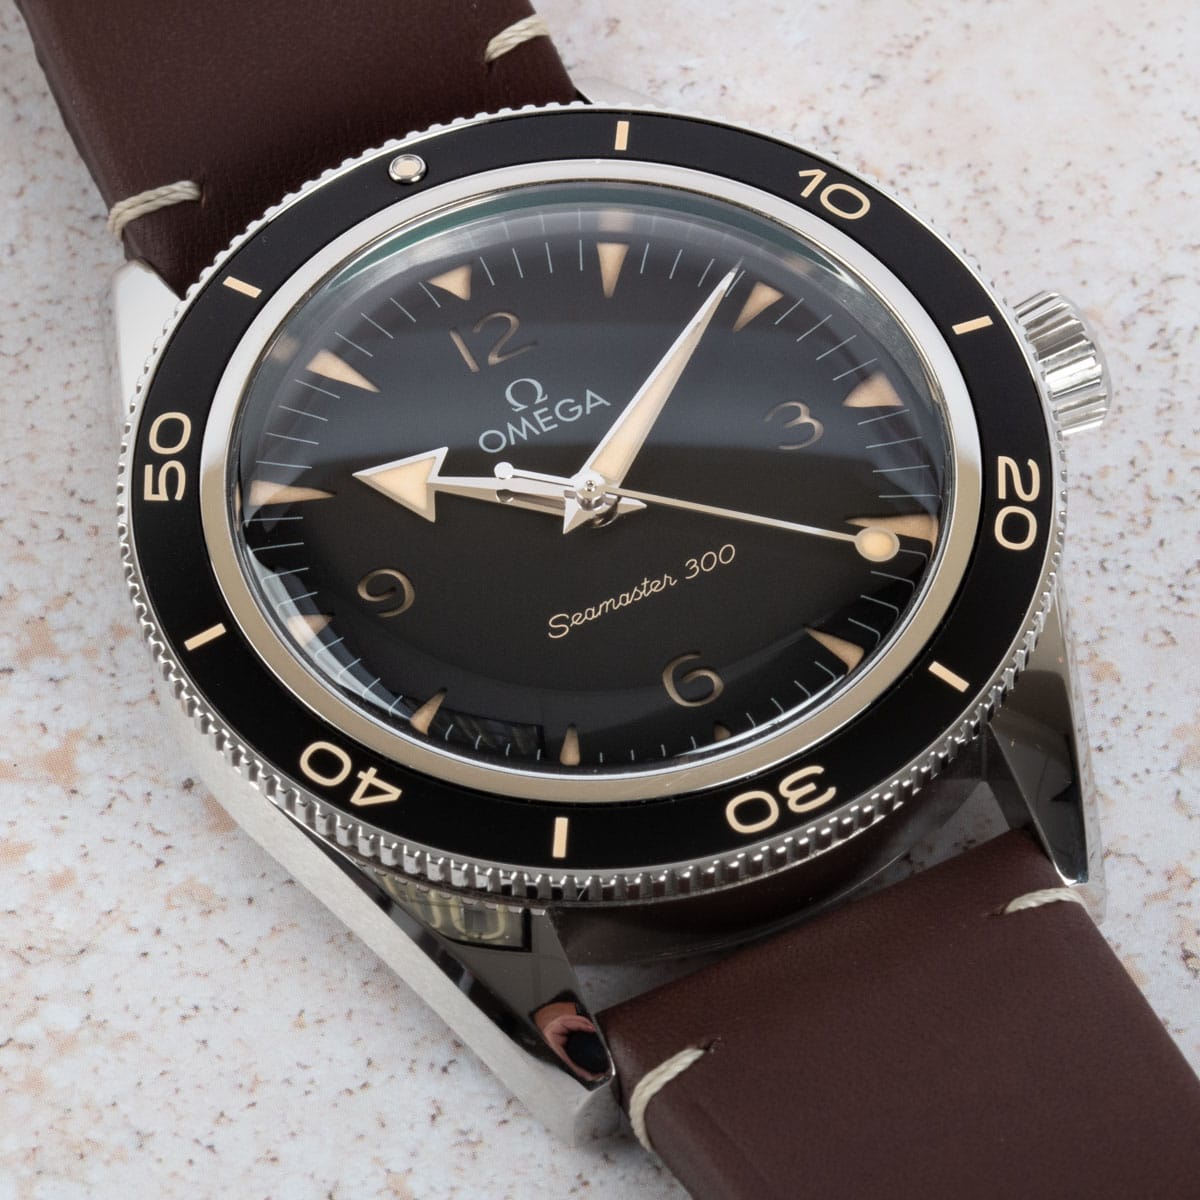 Stylied photo of  of Seamaster 300 Master Co-Axial